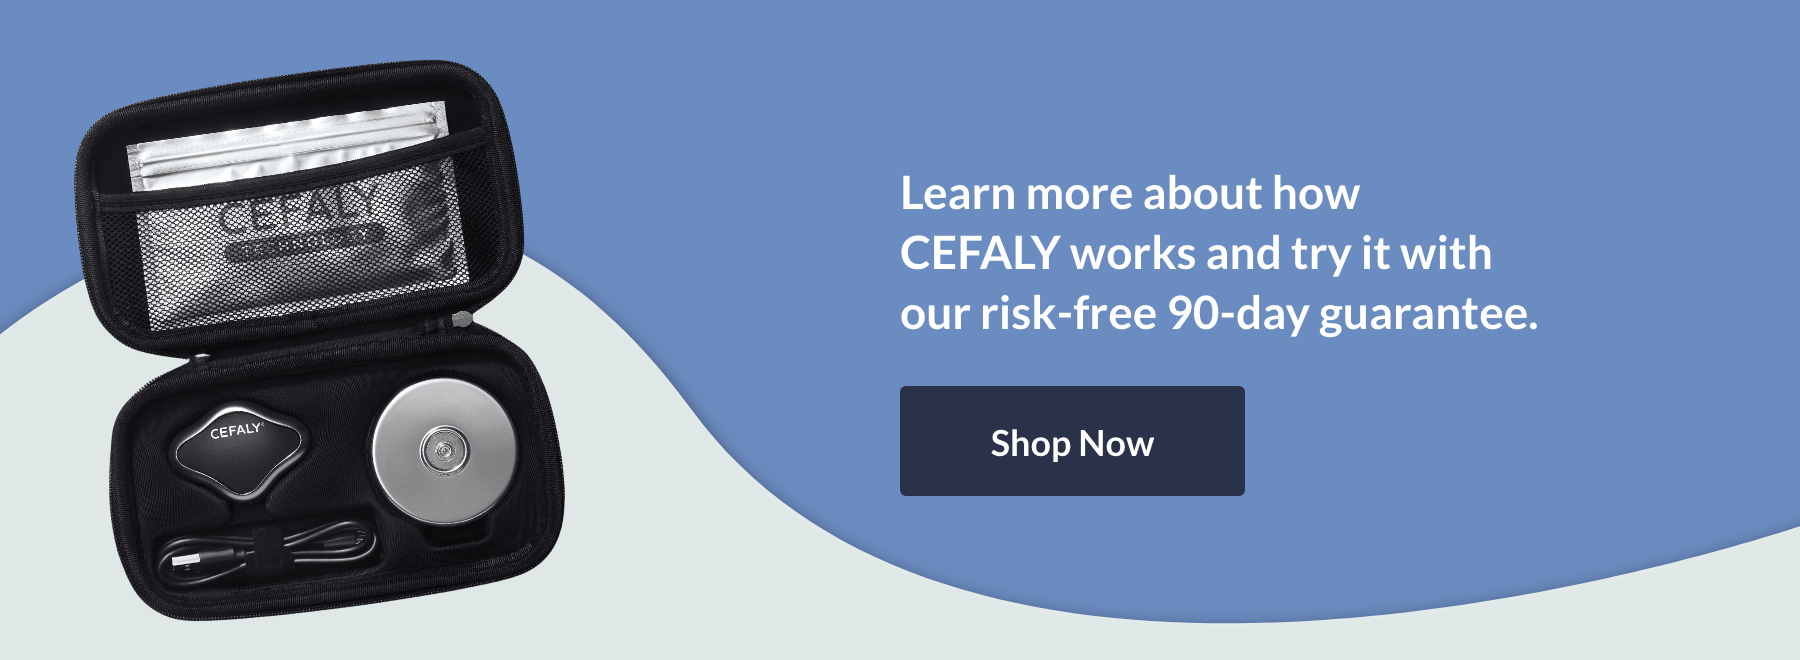 buy a cefaly device online